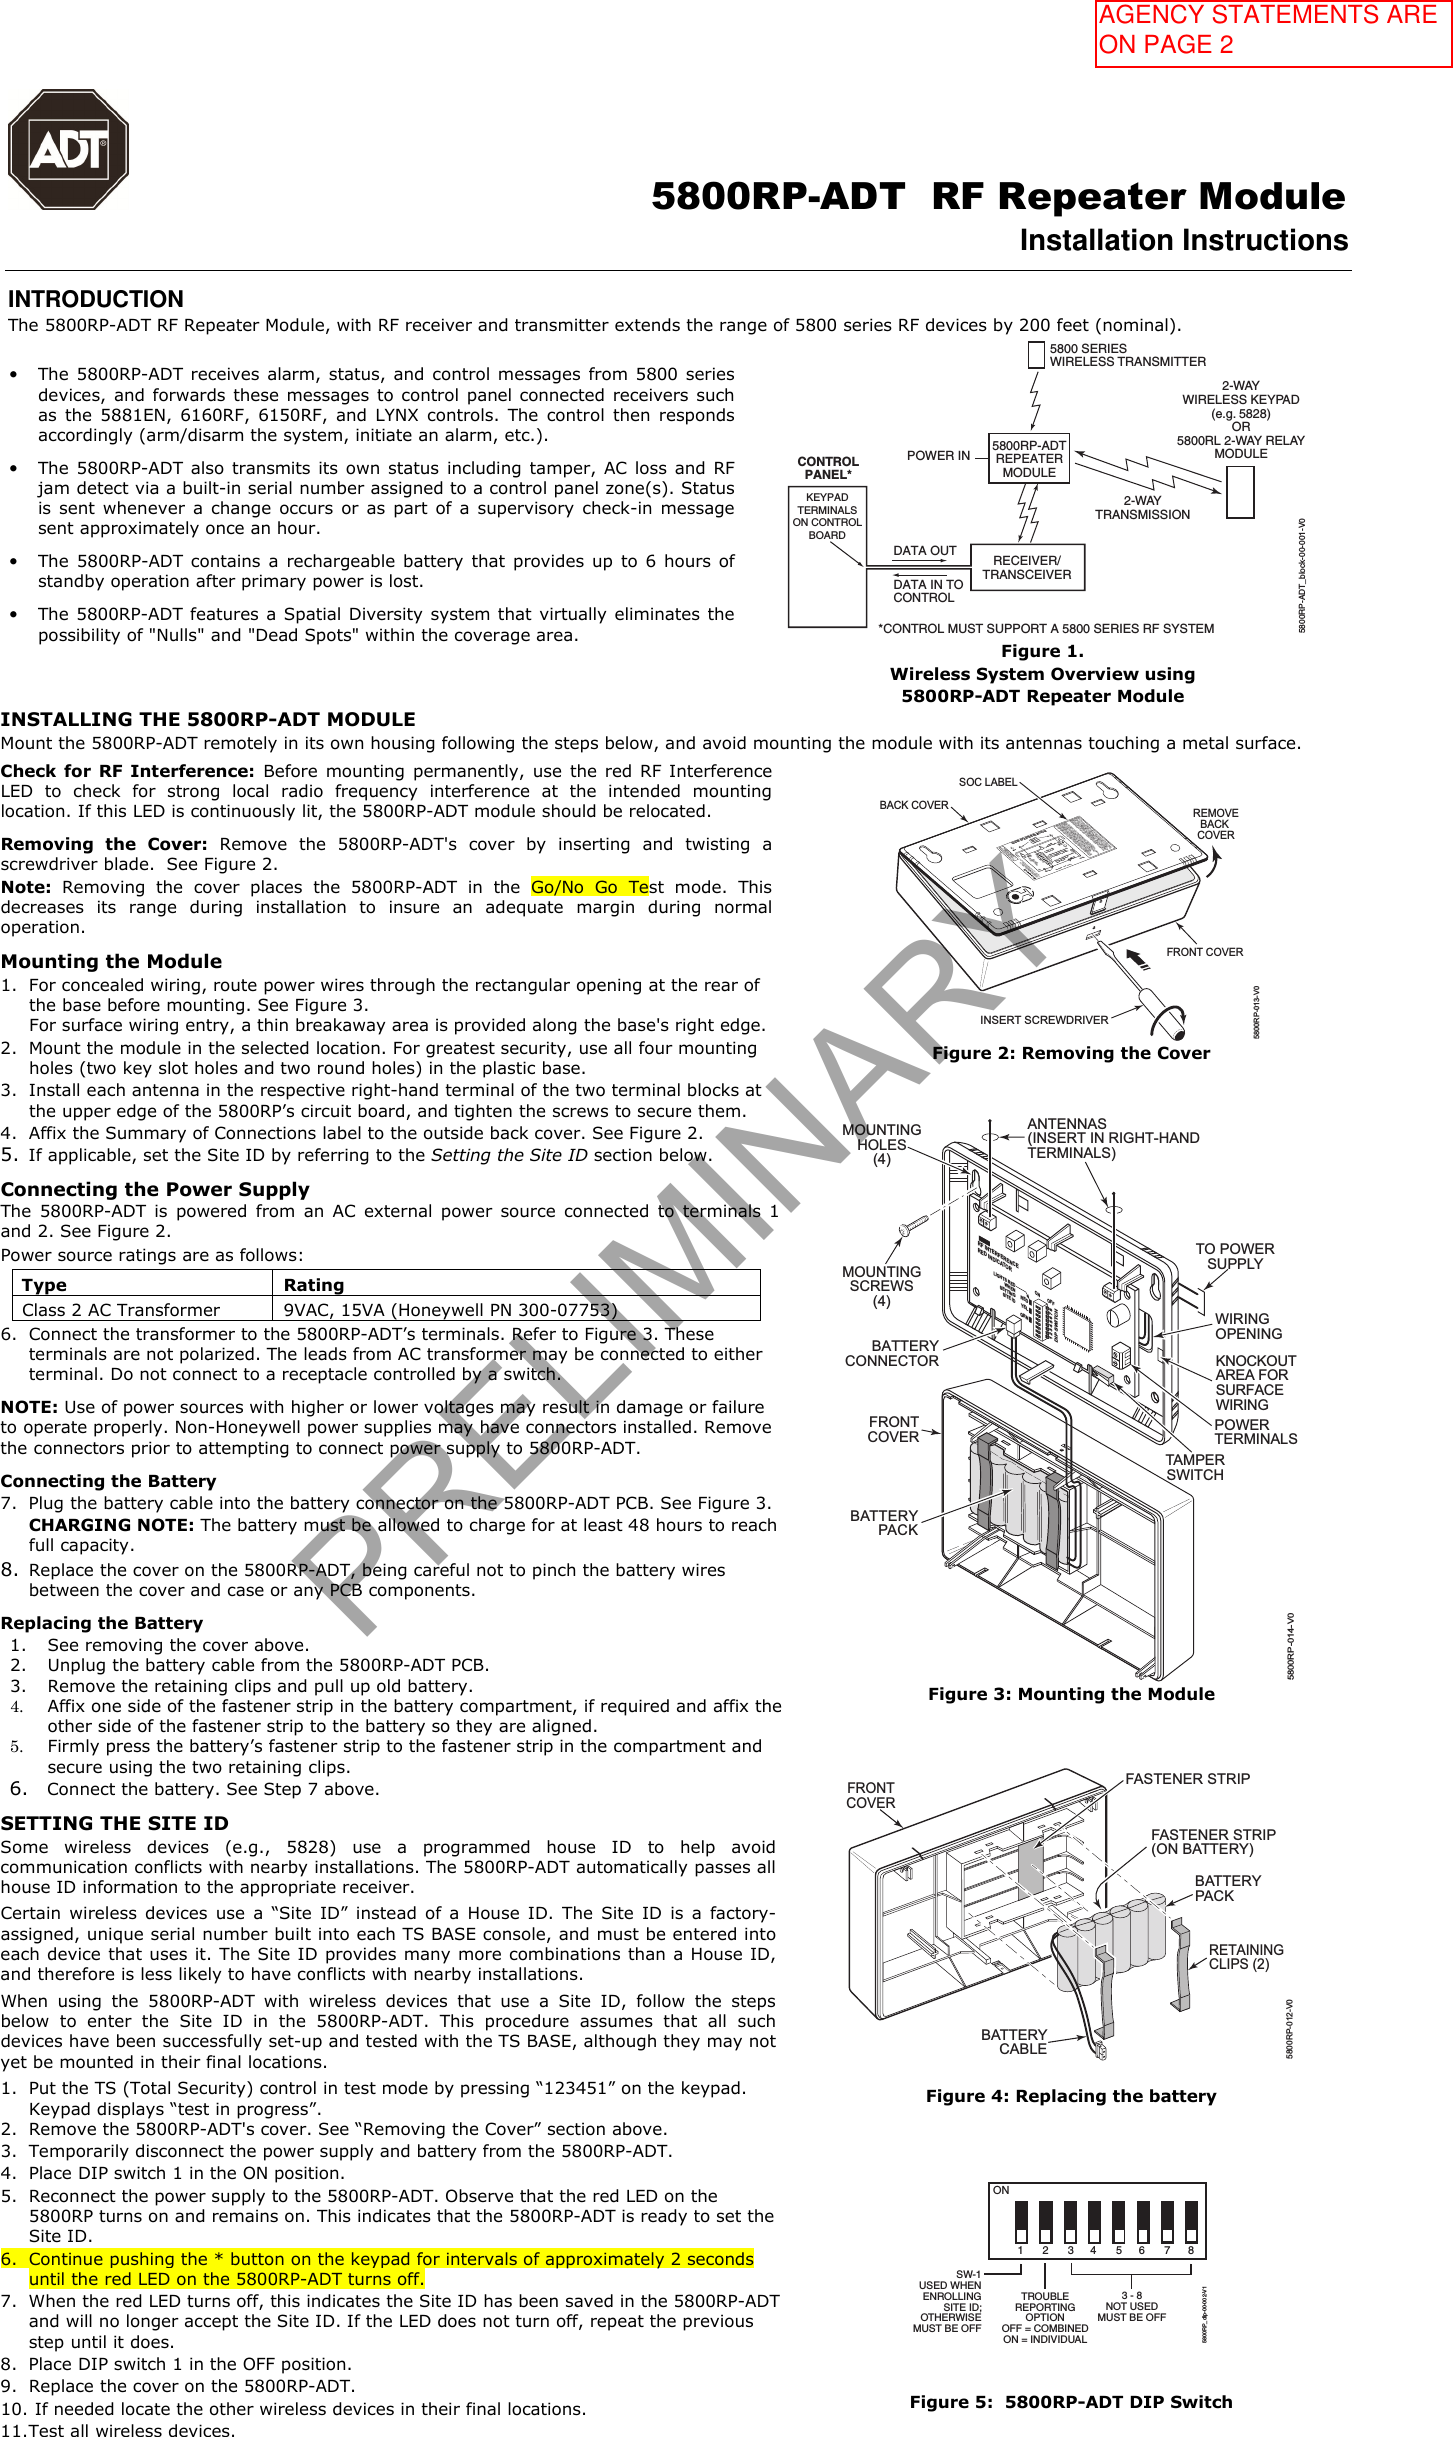                                                                                                      5800RP-ADT  RF Repeater Module Installation Instructions  INTRODUCTION The 5800RP-ADT RF Repeater Module, with RF receiver and transmitter extends the range of 5800 series RF devices by 200 feet (nominal). •The 5800RP-ADT receives alarm, status, and control messages from 5800 seriesdevices, and forwards these messages to control panel connected receivers suchas  the  5881EN,  6160RF,  6150RF, and  LYNX  controls. The  control  then respondsaccordingly (arm/disarm the system, initiate an alarm, etc.).•The 5800RP-ADT also transmits its own status including tamper, AC loss  and RFjam detect via a built-in serial number assigned to a control panel zone(s). Statusis sent  whenever a  change occurs  or as  part  of  a  supervisory check-in messagesent approximately once an hour.•The 5800RP-ADT contains  a  rechargeable battery  that  provides up  to 6  hours ofstandby operation after primary power is lost.•The 5800RP-ADT features a Spatial Diversity system that virtually eliminates thepossibility of &quot;Nulls&quot; and &quot;Dead Spots&quot; within the coverage area.RECEIVER/TRANSCEIVERKEYPADTERMINALSON CONTROLBOARDCONTROLPANEL*DATA OUTDATA IN TOCONTROL*CONTROL MUST SUPPORT A 5800 SERIES RF SYSTEM5800RP-ADTREPEATERMODULEPOWER IN5800 SERIESWIRELESS TRANSMITTER2-WAYWIRELESS KEYPAD(e.g. 5828)OR5800RL 2-WAY RELAYMODULE2-WAYTRANSMISSION5800RP-ADT_block-00-001-V0Figure 1.  Wireless System Overview using 5800RP-ADT Repeater Module INSTALLING THE 5800RP-ADT MODULE Mount the 5800RP-ADT remotely in its own housing following the steps below, and avoid mounting the module with its antennas touching a metal surface. Check for RF  Interference: Before mounting  permanently, use  the  red RF Interference LED  to  check  for  strong  local  radio  frequency  interference  at  the  intended  mounting location. If this LED is continuously lit, the 5800RP-ADT module should be relocated. Removing  the  Cover:  Remove  the  5800RP-ADT&apos;s  cover  by  inserting  and  twisting  a screwdriver blade.  See Figure 2. Note:  Removing  the  cover  places  the  5800RP-ADT  in  the  Go/No  Go  Test  mode.  This decreases  its  range  during  installation  to  insure  an  adequate  margin  during  normal operation. Mounting the Module 1. For concealed wiring, route power wires through the rectangular opening at the rear ofthe base before mounting. See Figure 3.For surface wiring entry, a thin breakaway area is provided along the base&apos;s right edge.2. Mount the module in the selected location. For greatest security, use all four mountingholes (two key slot holes and two round holes) in the plastic base.3. Install each antenna in the respective right-hand terminal of the two terminal blocks atthe upper edge of the 5800RP’s circuit board, and tighten the screws to secure them.4. Affix the Summary of Connections label to the outside back cover. See Figure 2.5. If applicable, set the Site ID by referring to the Setting the Site ID section below.Connecting the Power Supply  The  5800RP-ADT  is  powered  from  an  AC  external  power  source  connected  to  terminals  1 and 2. See Figure 2.  Power source ratings are as follows: Type  Rating Class 2 AC Transformer  9VAC, 15VA (Honeywell PN 300-07753) 6. Connect the transformer to the 5800RP-ADT’s terminals. Refer to Figure 3. Theseterminals are not polarized. The leads from AC transformer may be connected to eitherterminal. Do not connect to a receptacle controlled by a switch.NOTE: Use of power sources with higher or lower voltages may result in damage or failure to operate properly. Non-Honeywell power supplies may have connectors installed. Remove the connectors prior to attempting to connect power supply to 5800RP-ADT. Connecting the Battery 7. Plug the battery cable into the battery connector on the 5800RP-ADT PCB. See Figure 3.CHARGING NOTE: The battery must be allowed to charge for at least 48 hours to reachfull capacity.8. Replace the cover on the 5800RP-ADT, being careful not to pinch the battery wiresbetween the cover and case or any PCB components.Replacing the Battery 1. See removing the cover above.2. Unplug the battery cable from the 5800RP-ADT PCB.3. Remove the retaining clips and pull up old battery.4. Affix one side of the fastener strip in the battery compartment, if required and affix theother side of the fastener strip to the battery so they are aligned.5. Firmly press the battery’s fastener strip to the fastener strip in the compartment andsecure using the two retaining clips.6. Connect the battery. See Step 7 above.SETTING THE SITE ID Some  wireless  devices  (e.g.,  5828)  use  a  programmed  house  ID  to  help  avoid communication conflicts with nearby installations. The 5800RP-ADT automatically passes all house ID information to the appropriate receiver. Certain  wireless  devices  use  a  “Site  ID”  instead  of  a  House  ID.  The  Site  ID  is  a  factory-assigned, unique serial number built into each TS BASE console, and must be entered intoeach device that uses it. The Site ID provides many more combinations than a House ID, and therefore is less likely to have conflicts with nearby installations. When  using  the  5800RP-ADT  with  wireless  devices  that  use  a  Site  ID,  follow  the  steps below  to  enter  the  Site  ID  in  the  5800RP-ADT.  This  procedure  assumes  that  all  such devices have been successfully set-up and tested with the TS BASE, although they may notyet be mounted in their final locations. 1. Put the TS (Total Security) control in test mode by pressing “123451” on the keypad.Keypad displays “test in progress”.2. Remove the 5800RP-ADT&apos;s cover. See “Removing the Cover” section above.3. Temporarily disconnect the power supply and battery from the 5800RP-ADT.4. Place DIP switch 1 in the ON position.5. Reconnect the power supply to the 5800RP-ADT. Observe that the red LED on the5800RP turns on and remains on. This indicates that the 5800RP-ADT is ready to set theSite ID.6. Continue pushing the * button on the keypad for intervals of approximately 2 secondsuntil the red LED on the 5800RP-ADT turns off.7. When the red LED turns off, this indicates the Site ID has been saved in the 5800RP-ADTand will no longer accept the Site ID. If the LED does not turn off, repeat the previousstep until it does.8. Place DIP switch 1 in the OFF position.9. Replace the cover on the 5800RP-ADT.10. If needed locate the other wireless devices in their final locations.11. Test all wireless devices.REMOVEBACK COVERBACK COVERFRONT COVERINSERT SCREWDRIVER5800RP-013-V0SOC LABELON  OFF2 3 4 5 6 7 81TROUBLE REPORTING OPTIONOFF = COMBINED (1 ZONE)ON = INDIVIDUAL (4 ZONES)POWER3 - 8 NOT USEDMUST BE OFFSW-1 USED WHEN ENROLLINGSITE ID; OTHERWISEMUST BE OFFTHIS DEVICE COMPLIES WITH PART 15 OF FCC RULES ANDRSS 210 OF INDUSTRY CANADA. OPERATION IS SUBJECT TOTHE FOLLOWING TWO CONDITIONS: (1) THIS DEVICE MAYNOT CAUSE HARMFUL INTERFERENCE, AND (2) THIS DEVICEMUST ACCEPT ANY INTERFERENCE RECEIVED, INCLUDINGINTERFERENCE THAT MAY CAUSE UNDESIRED OPERATION.CET APPAREIL EST CONFORME À LA PARTIE 15 DESRÈGLES DE LA FCC &amp; DE RSS 210 DES INDUSTRIES CANADA.SON FONCTIONNEMENT EST SOUMIS AUX CONDITIONSSUIVANTES: (1) CET APPAREIL NE DOIT PAS CAUSERD&apos;INTERFERENCES NUISIBLES. (2) CET APPAREIL DOITACCEPTER TOUTE INTERFERENCE REÇUE Y COMPRIS LESINTERFERENCES CAUSANT UNE RECEPTION INDÉSIRABLE.800-15869    8/13    Rev. AFCC ID CFS 8DL5800RP2IC:573F-5800RP2IC MODEL: 5800RP2RFINDICATORRED LEDDIP SWITCH2 Corporate Center Drive, Suite 100P.O. Box 9040, Melville, NY 11747Copyright © 2013 Honeywell International Inc.5800RP RF REPEATER MODULEANTENNAS(INSERT INRIGHT-HANDTERMINALS)BATTERY5800RPCIRCUIT BOARDFigure 2: Removing the Cover ++++TO POWERSUPPLYTAMPERSWITCHMOUNTINGSCREWS(4)BATTERYCONNECTORANTENNAS(INSERT IN RIGHT-HANDTERMINALS)WIRINGOPENINGKNOCKOUTAREA FORSURFACEWIRINGPOWERTERMINALSMOUNTINGHOLES(4)FRONTCOVERBATTERYPACKRF INTERFERENCERED INDICATORLIGHTS REDWHENSETTINGSITE IDDIP SWITCH2 3 4 567 81REDGRNON OFFYEL5800RP-014-V0Figure 3: Mounting the Module 5800RP-012-V0RETAININGCLIPS (2)FRONTCOVERBATTERYPACKBATTERYCABLEFASTENER STRIP(ON BATTERY)FASTENER STRIPFigure 4: Replacing the battery ON2 3 4 5 6 7 81TROUBLEREPORTINGOPTIONOFF = COMBINEDON = INDIVIDUAL3 - 8NOT USEDMUST BE OFFSW-1USED  WHENENROLLINGSITE ID;OTHERWISEMUST BE OFF5800RP_dip-00-002-V1Figure 5:  5800RP-ADT DIP Switch PRELIMINARYAGENCY STATEMENTS ARE ON PAGE 2